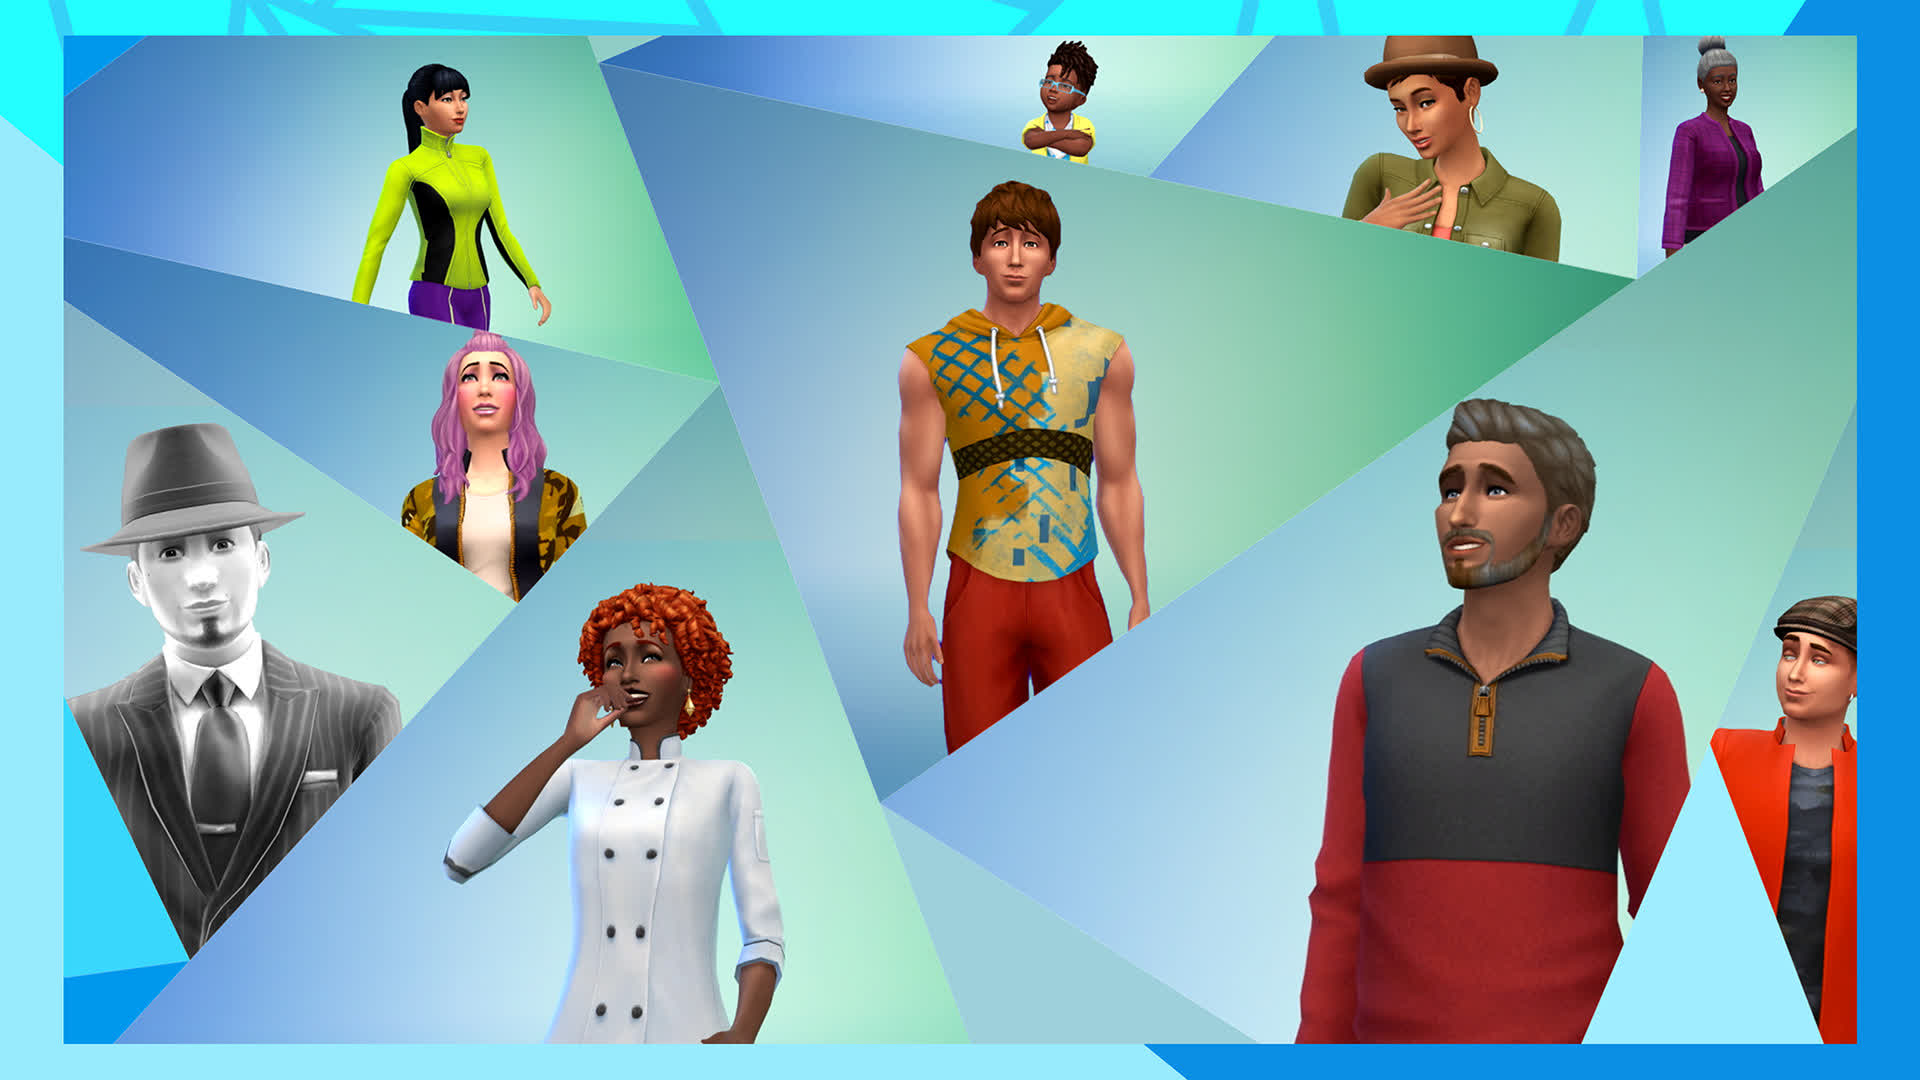 The Sims 4 is going free to play in October